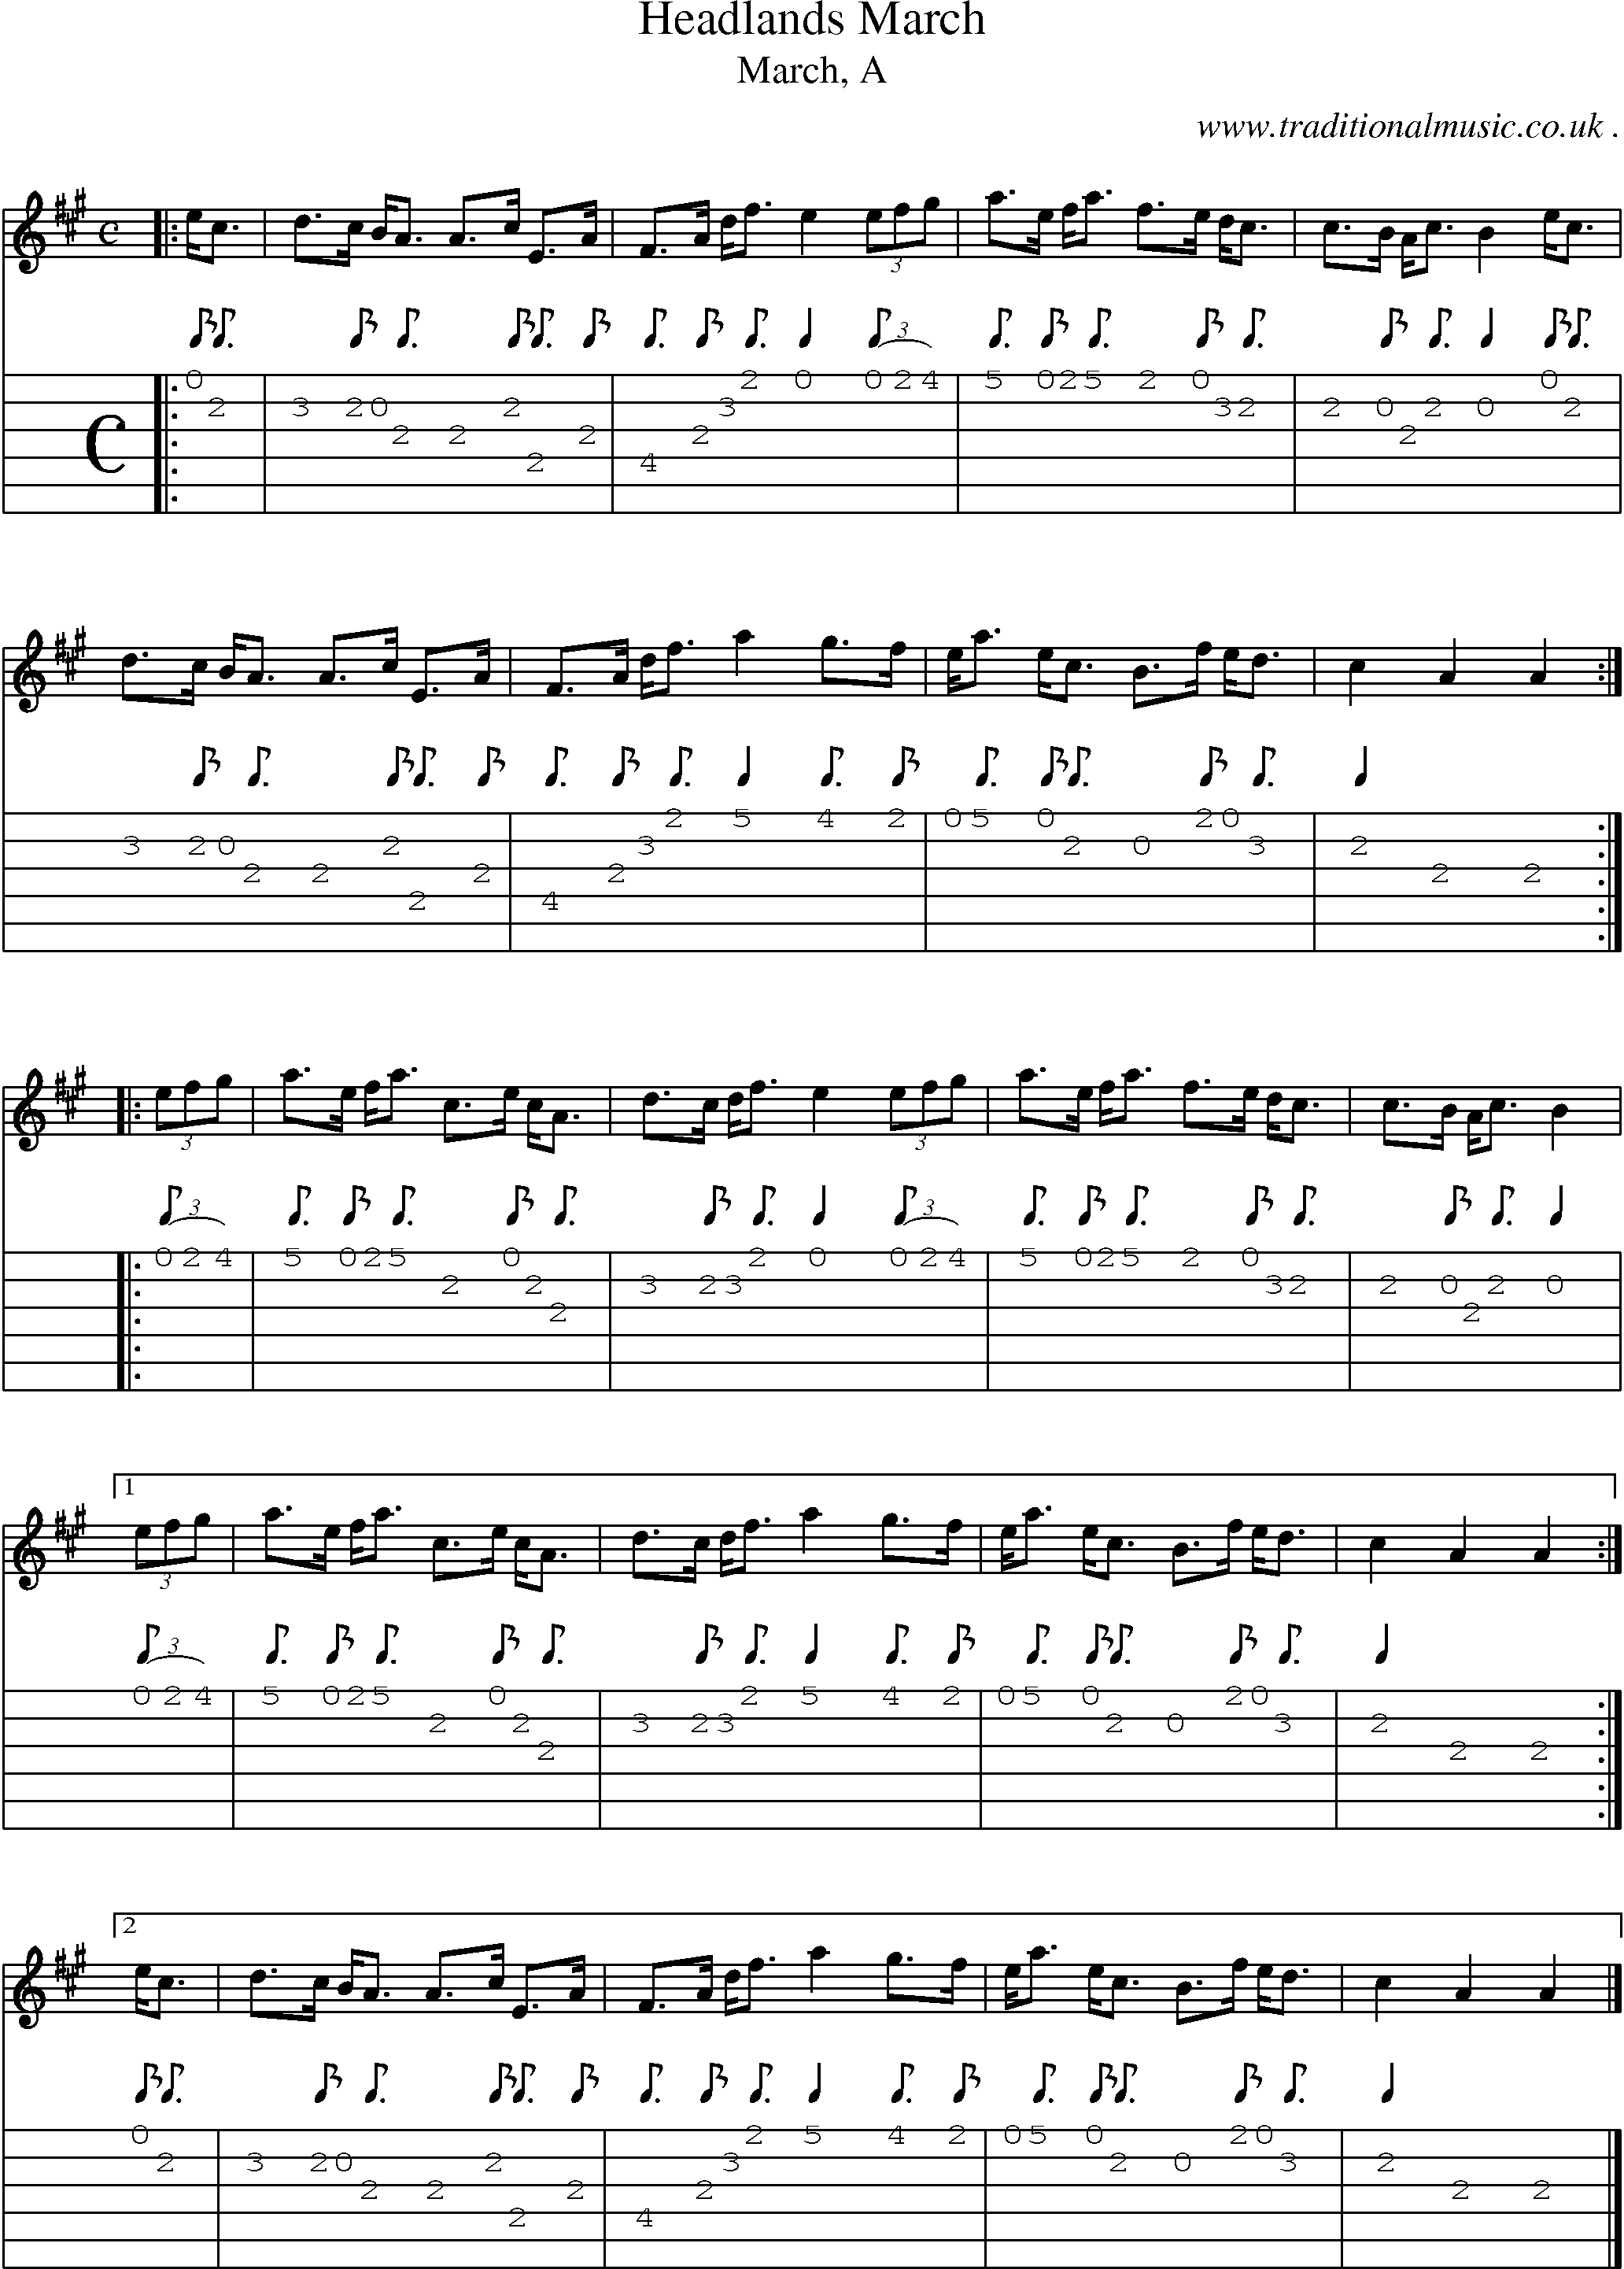 Sheet-music  score, Chords and Guitar Tabs for Headlands March